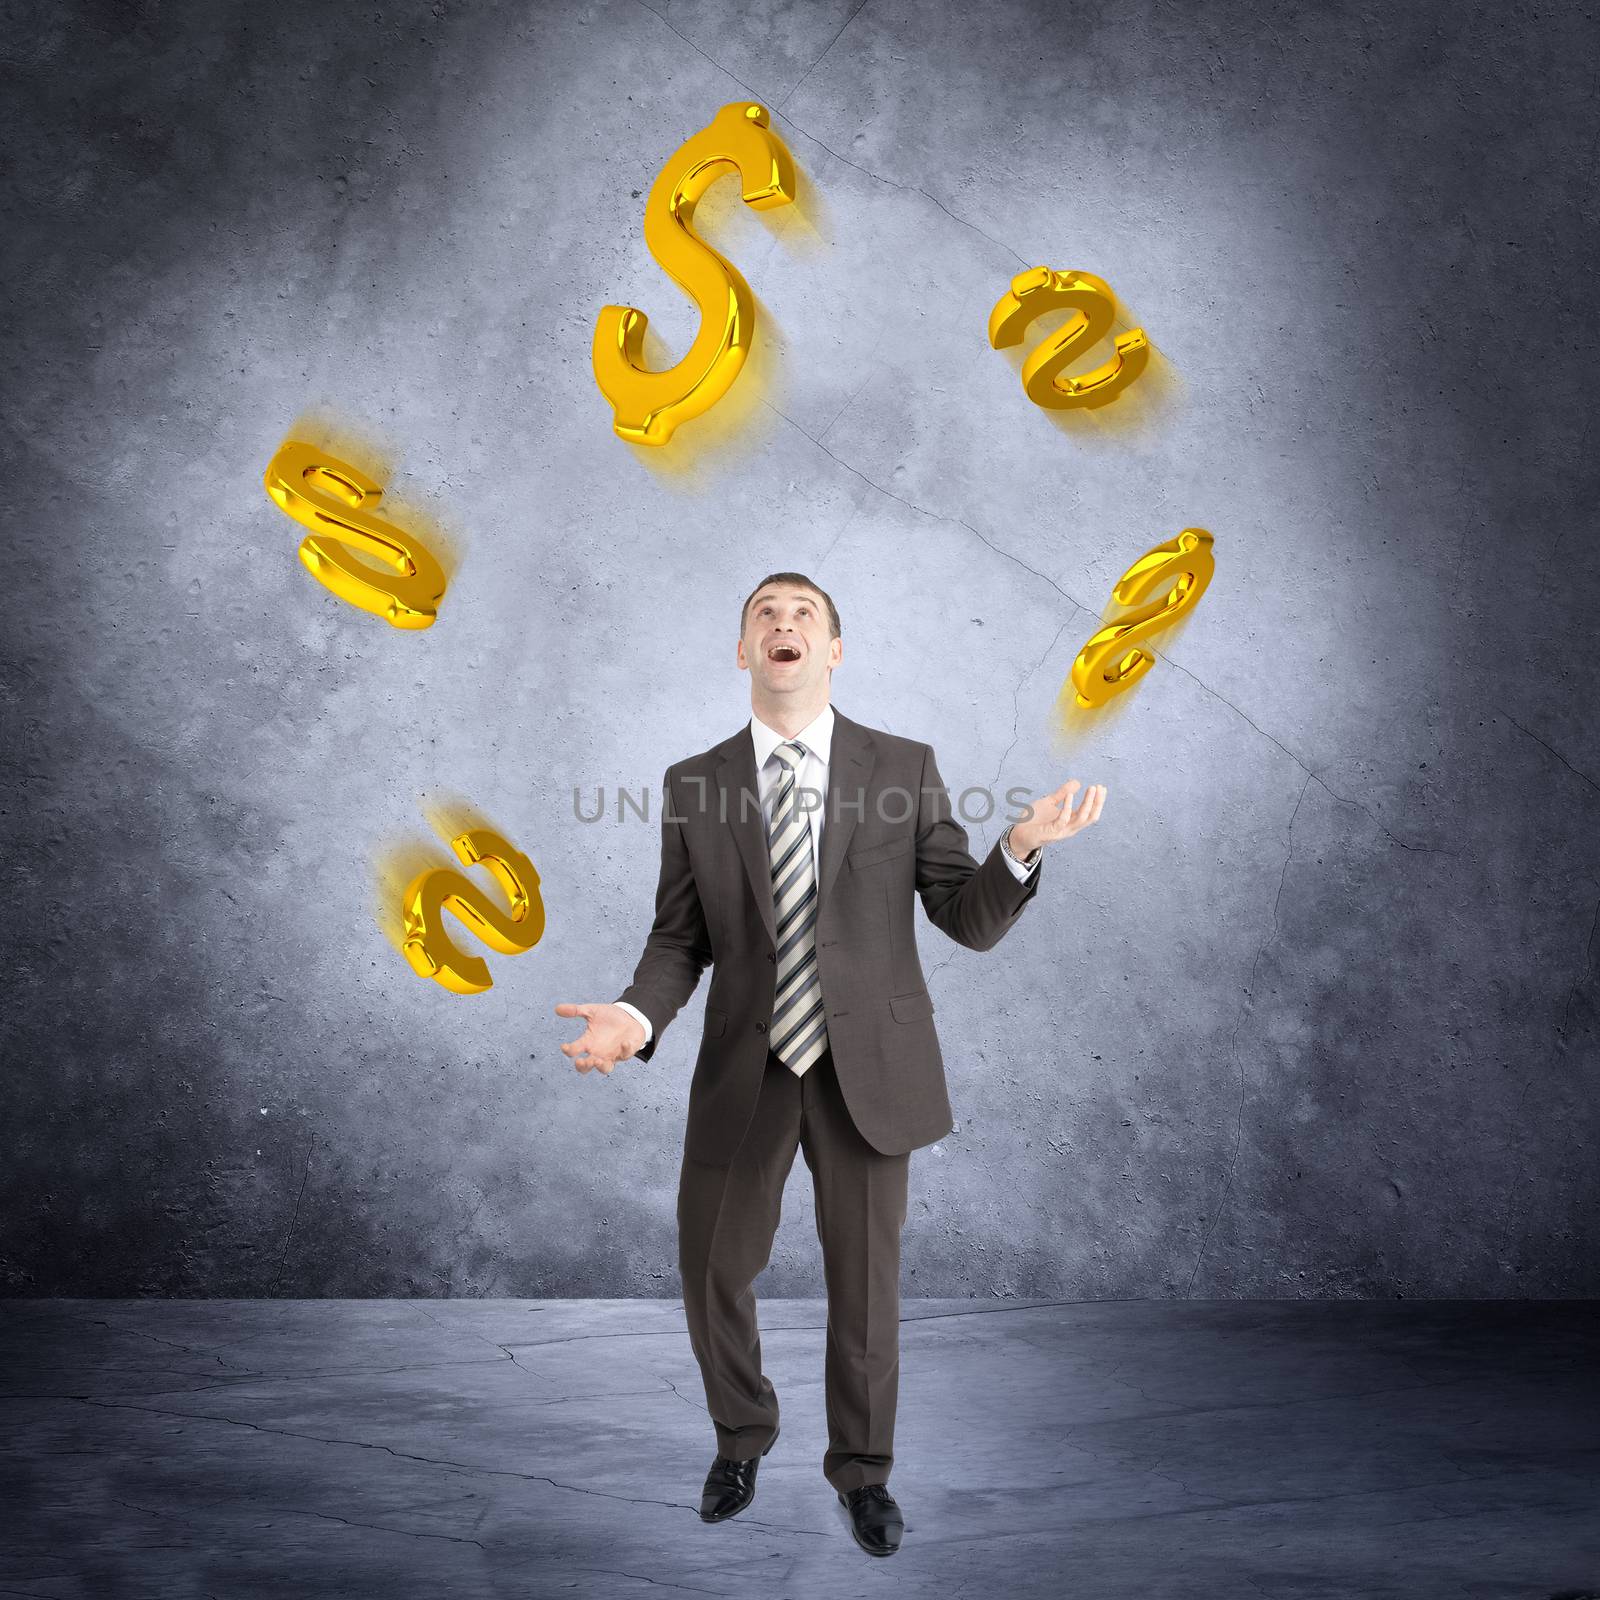 Businessman juggling dollar sign on abstract grey background